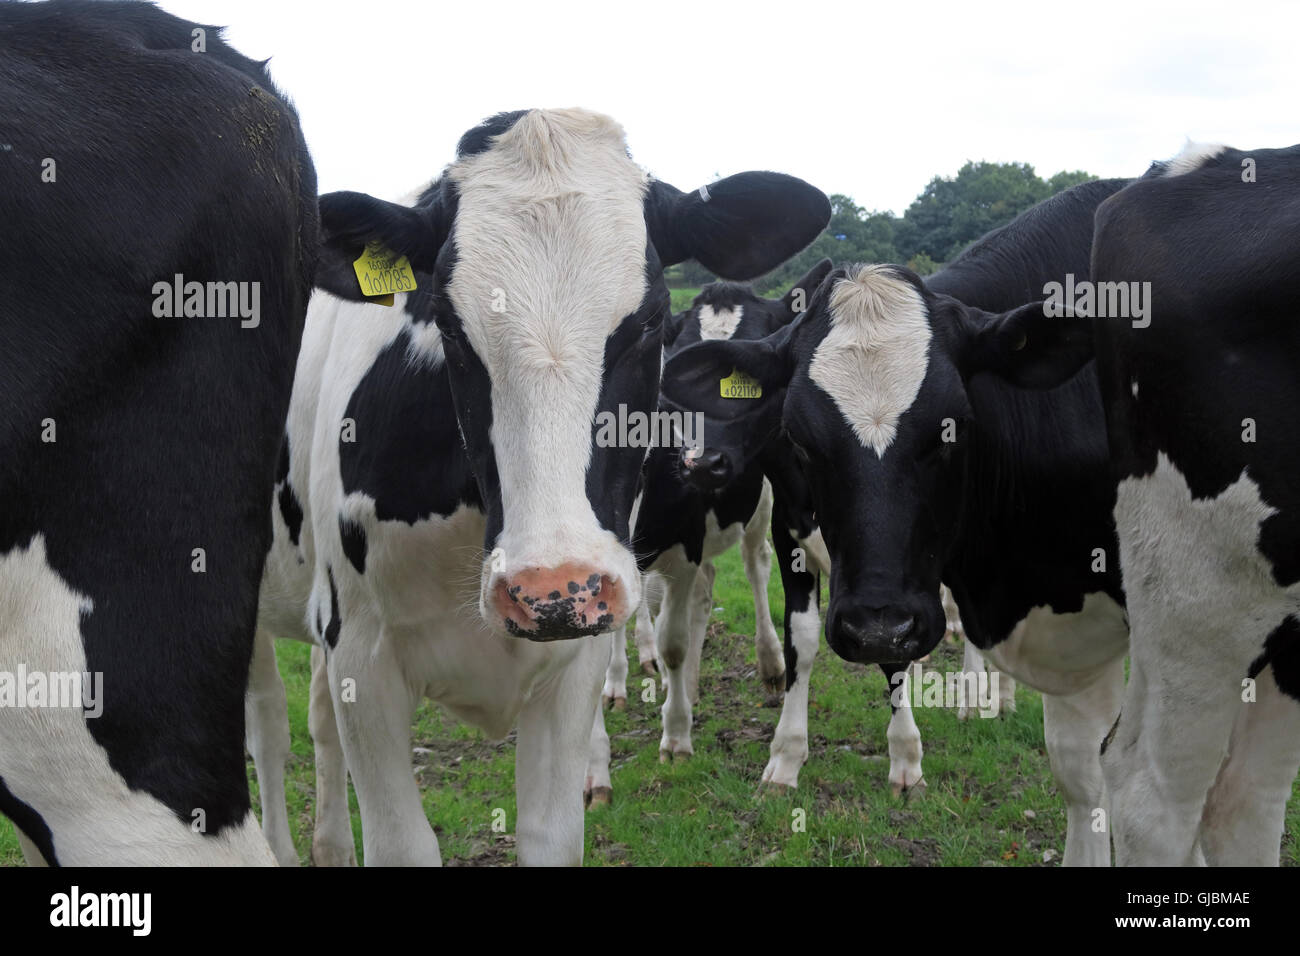 Cattle, a herd of cows in a cow field, Grappenhall, Cheshire, North West England, UK, WA4 Stock Photo